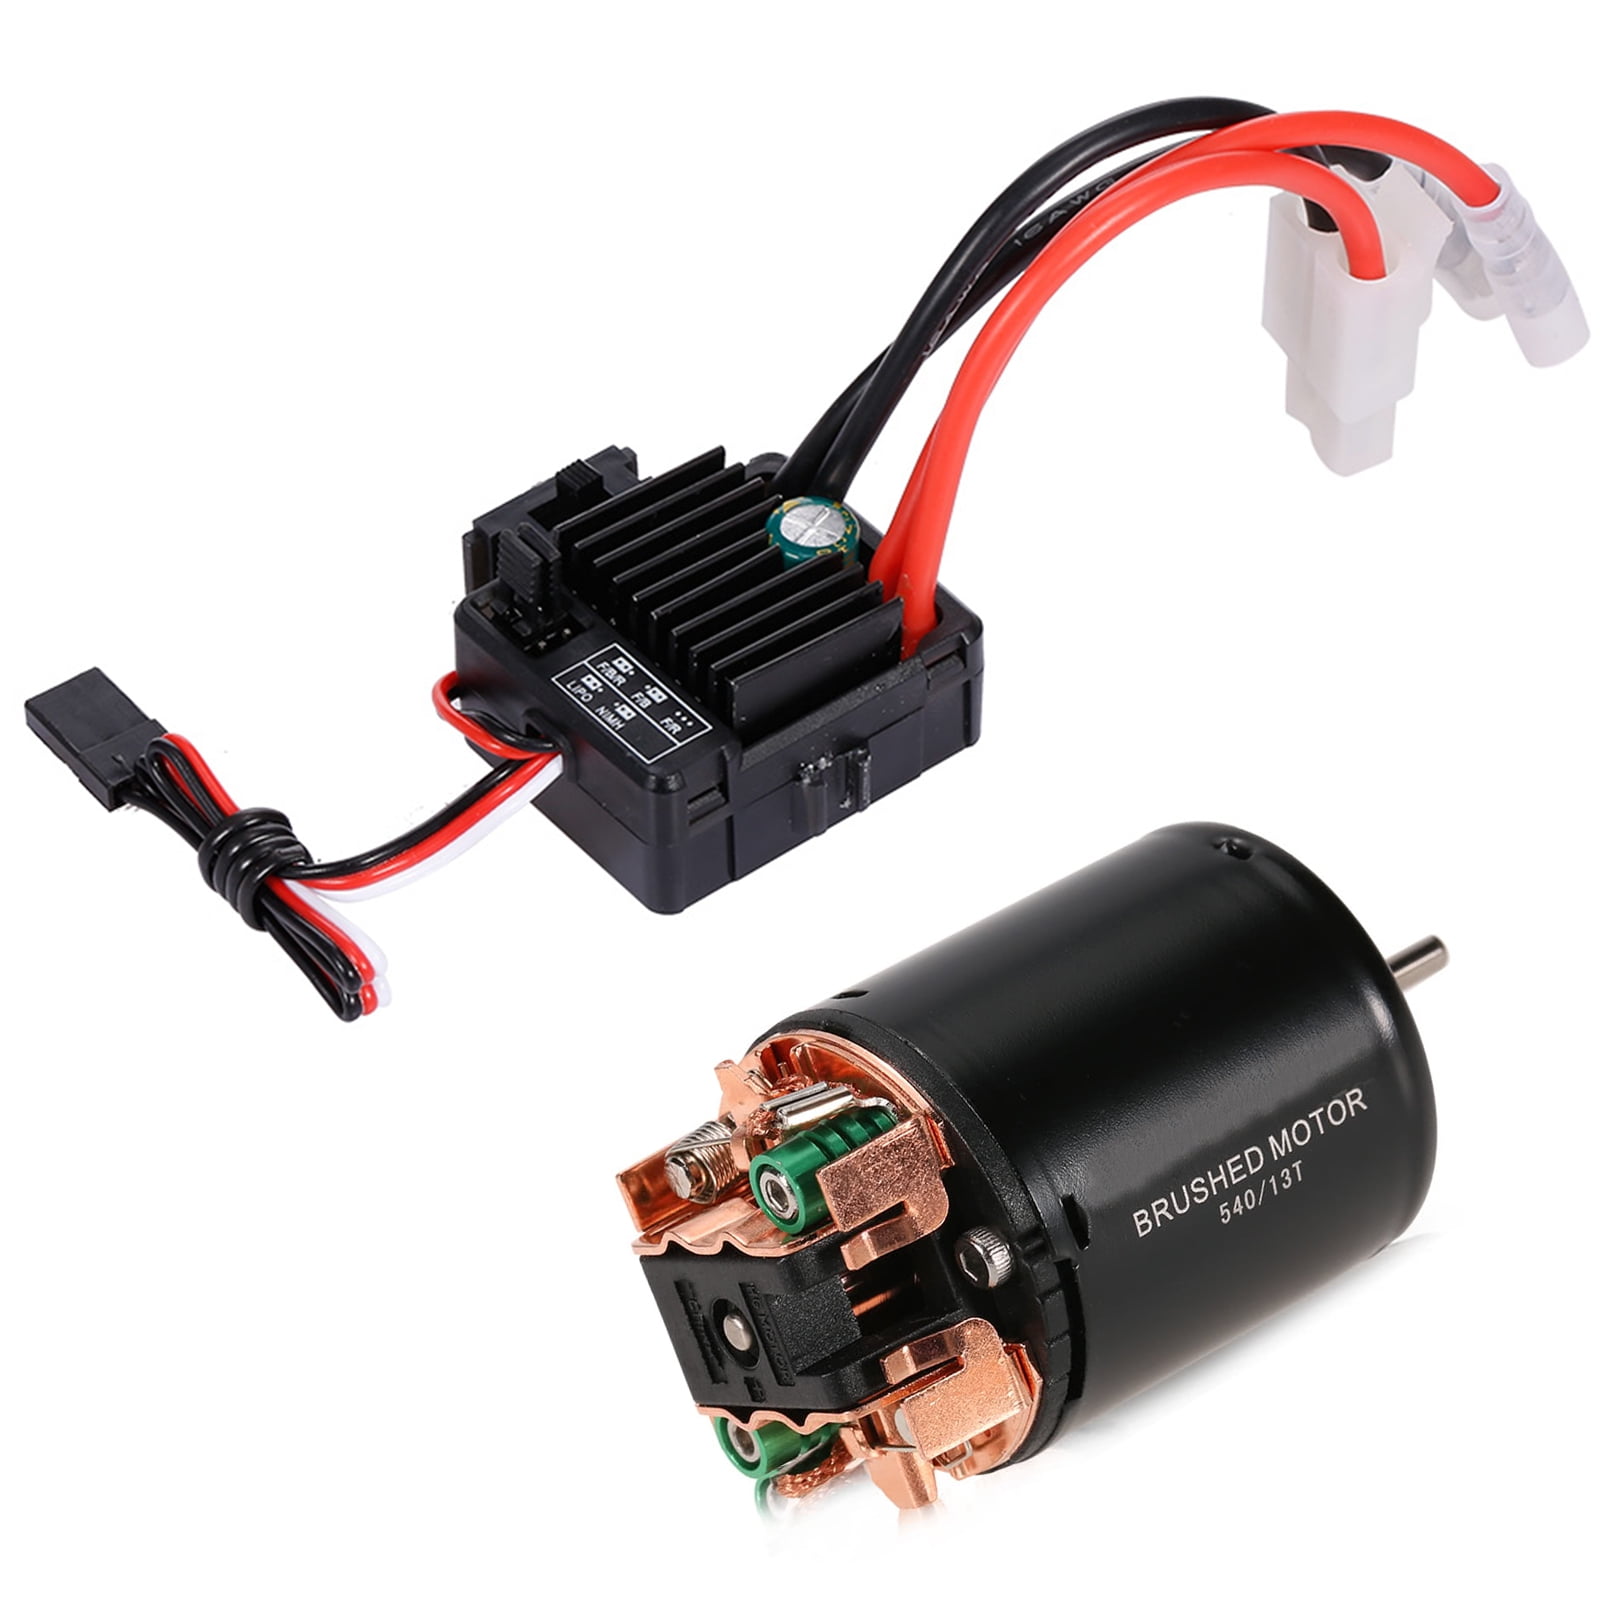 GoolRC 540 13T Brushed Motor w/ 60A ESC for 1/10 Traxxas Ford F-150 RC Car N3A9 